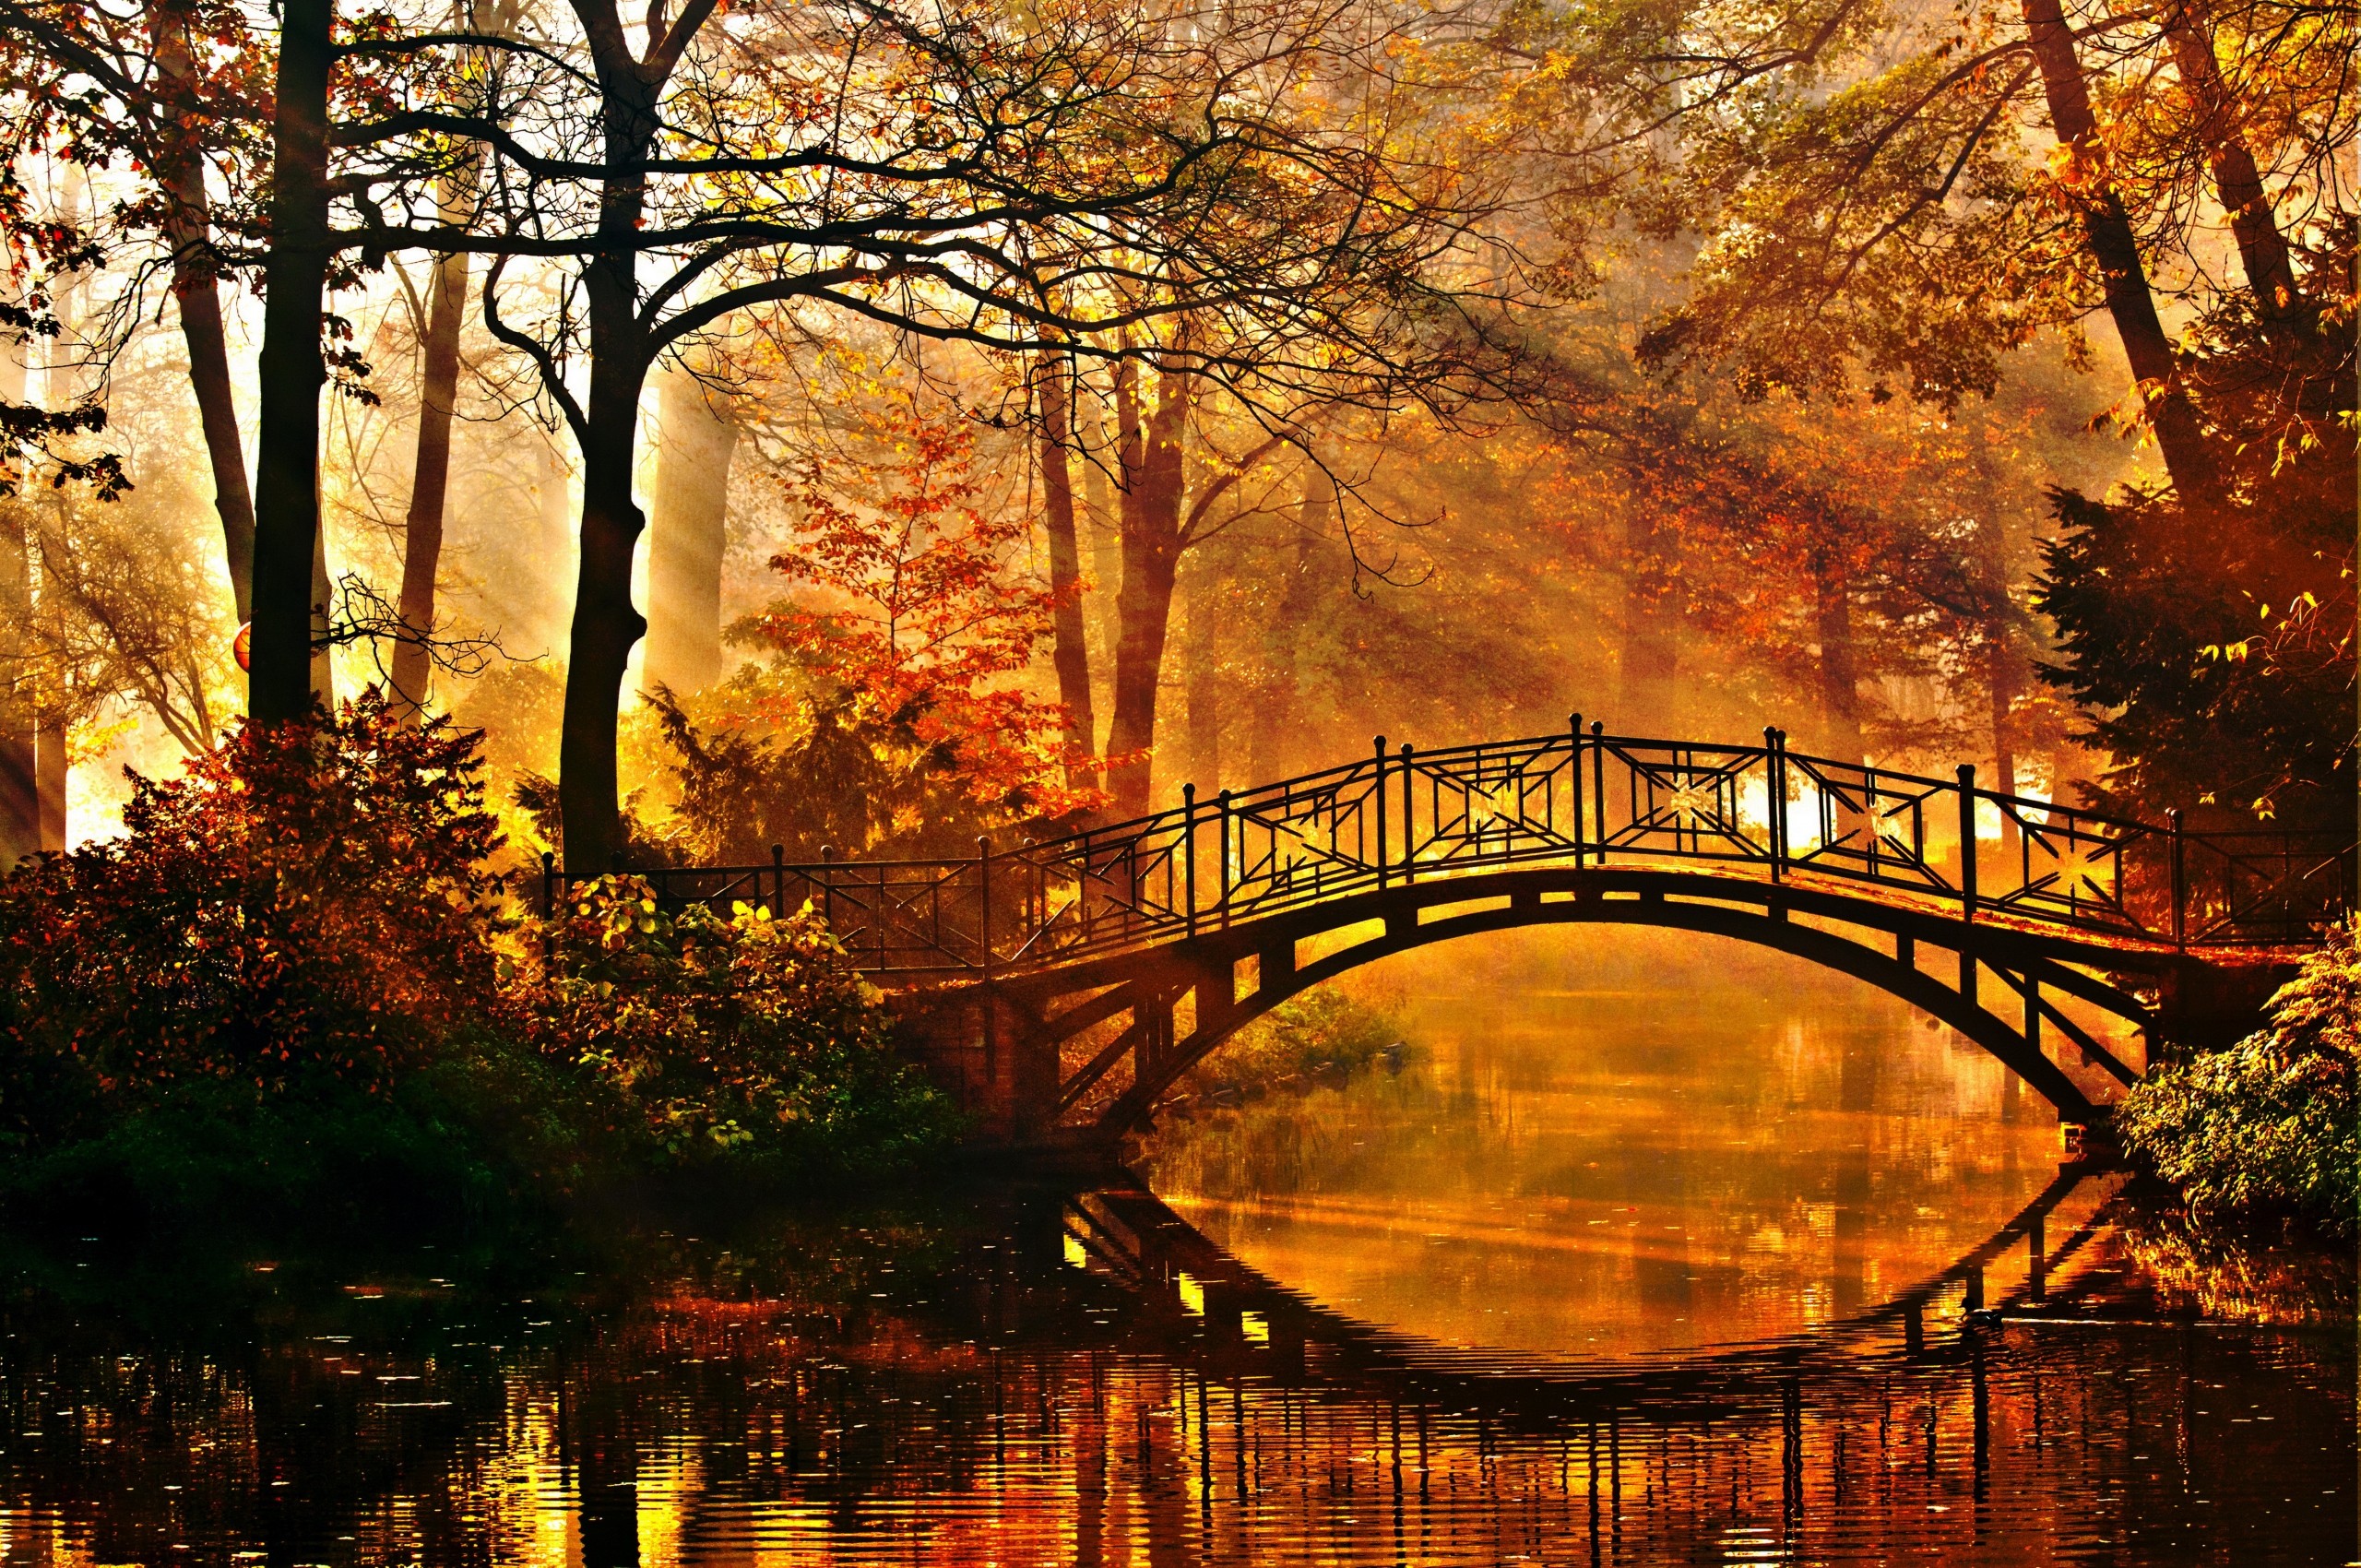 General 2560x1700 river bridge fall trees water reflection sunlight plants outdoors park